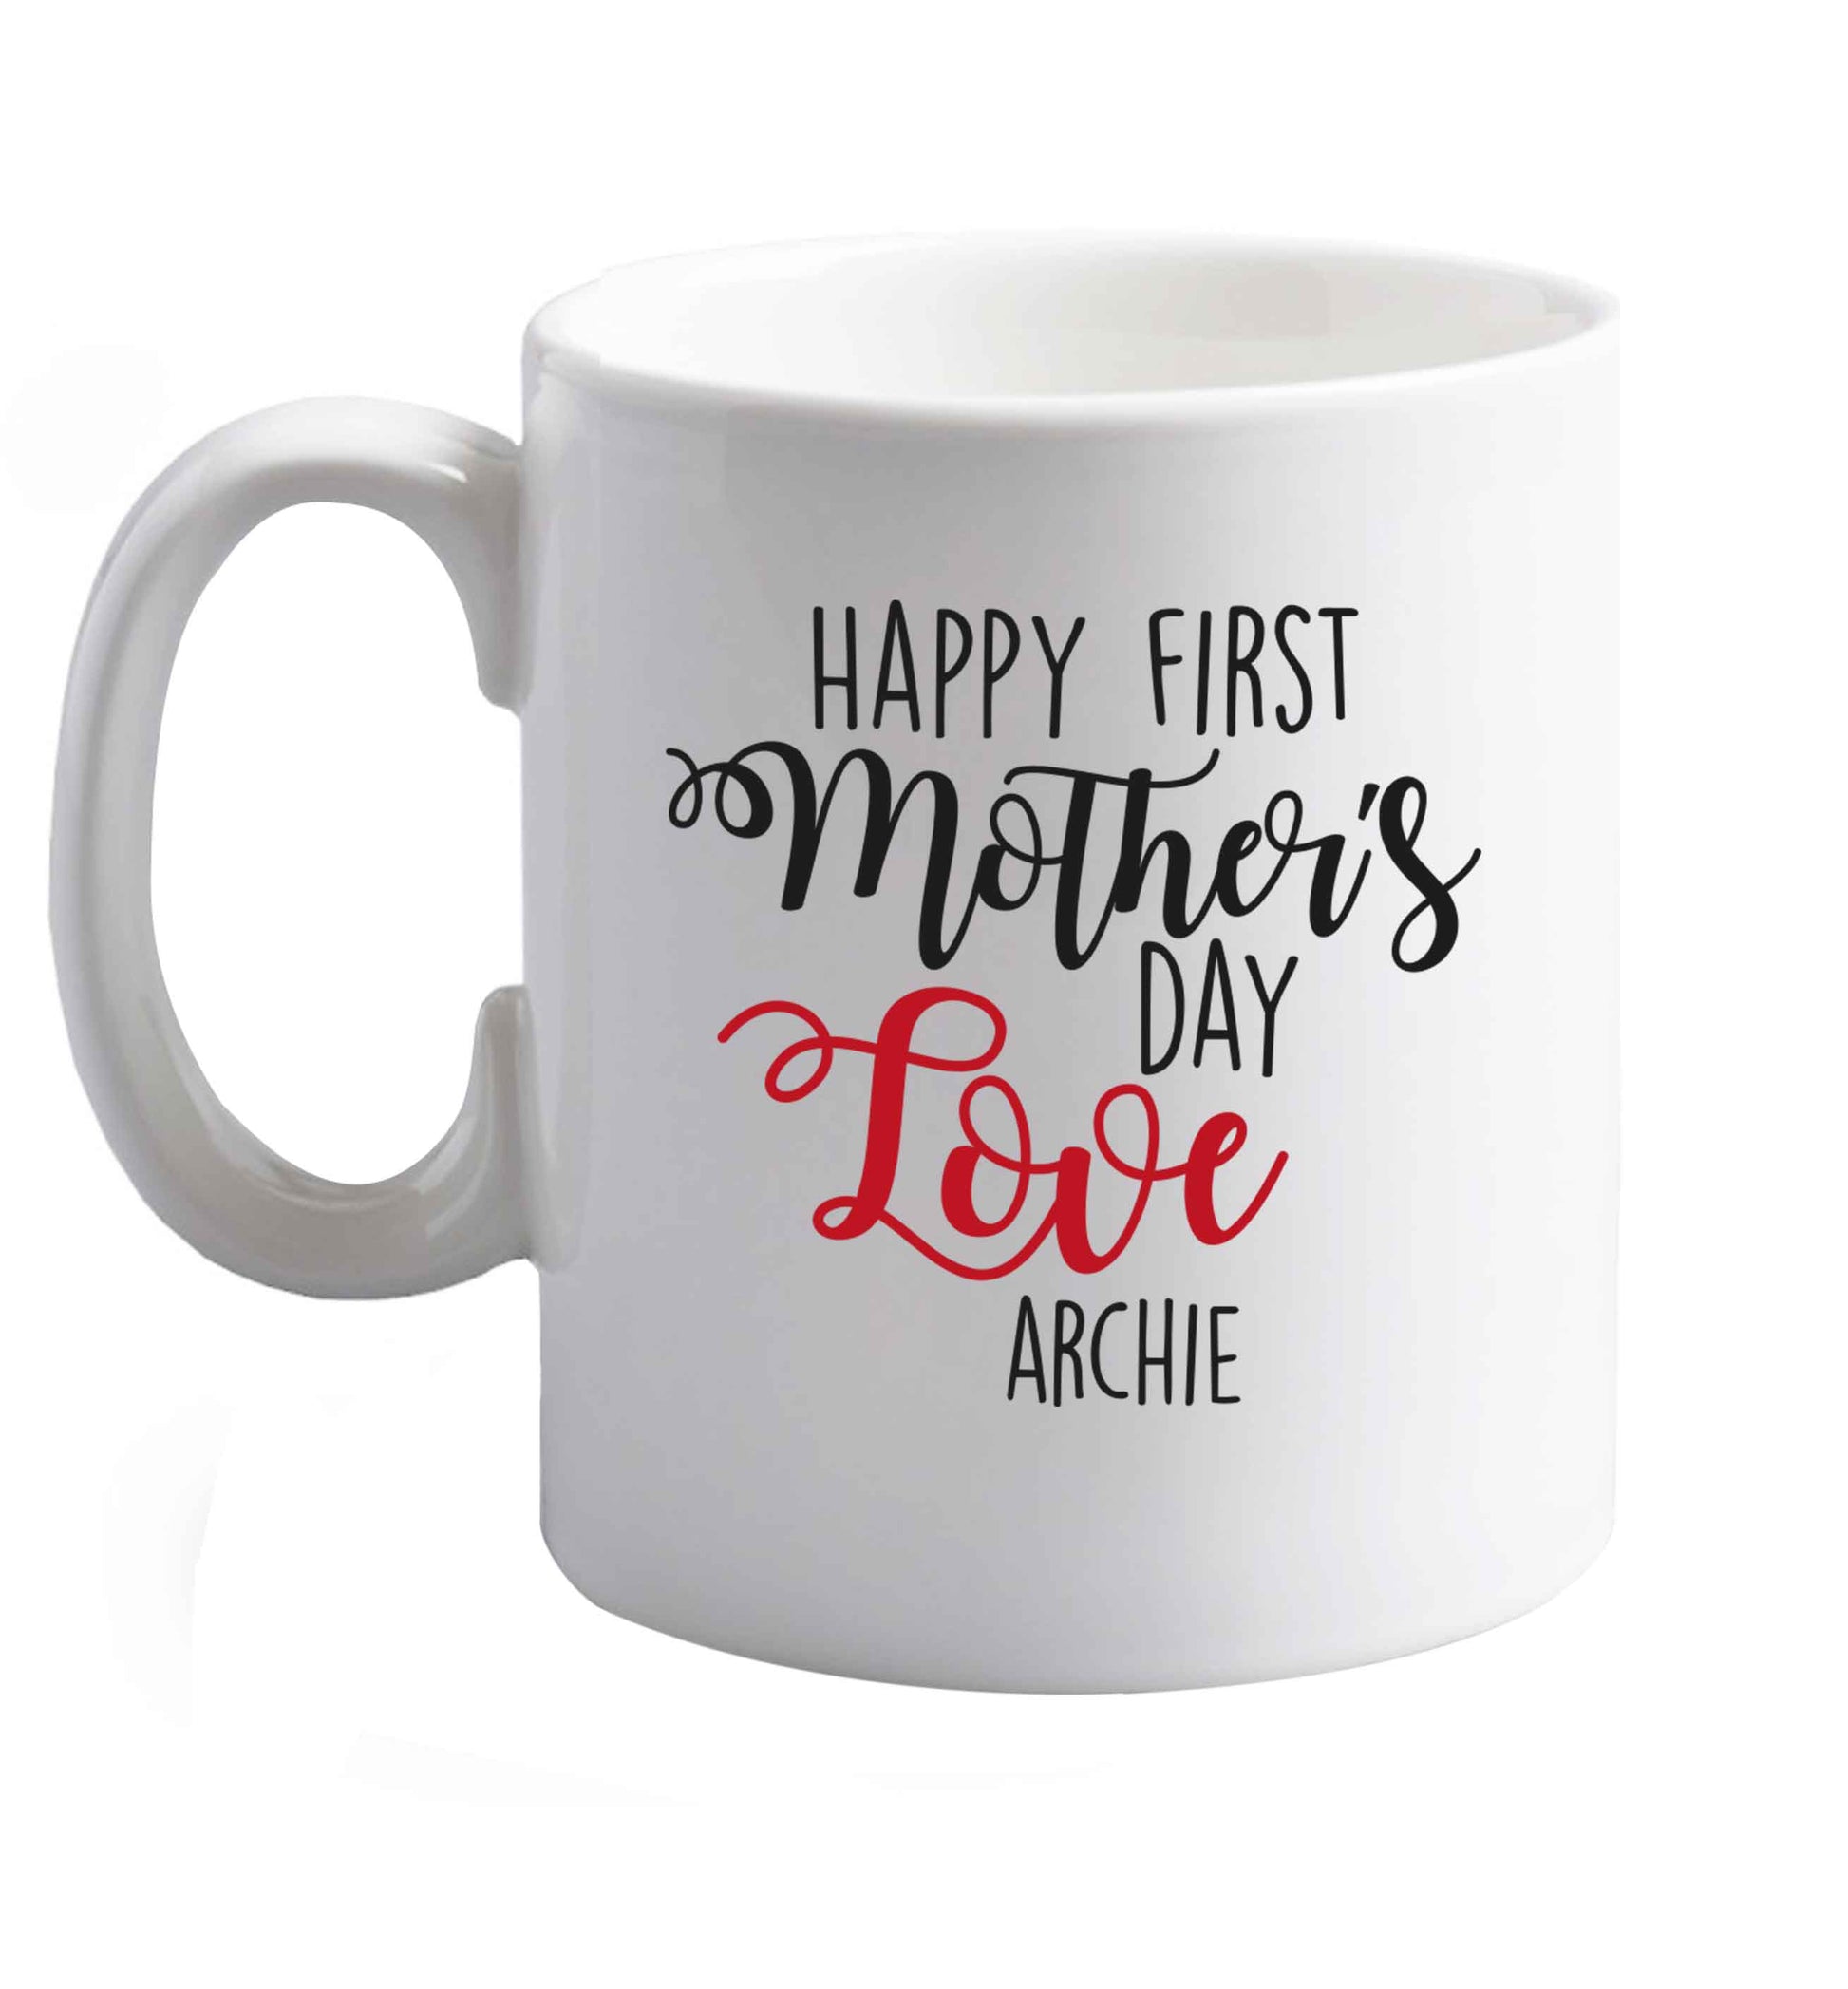 10 oz Personalised happy first mother's day love ceramic mug right handed